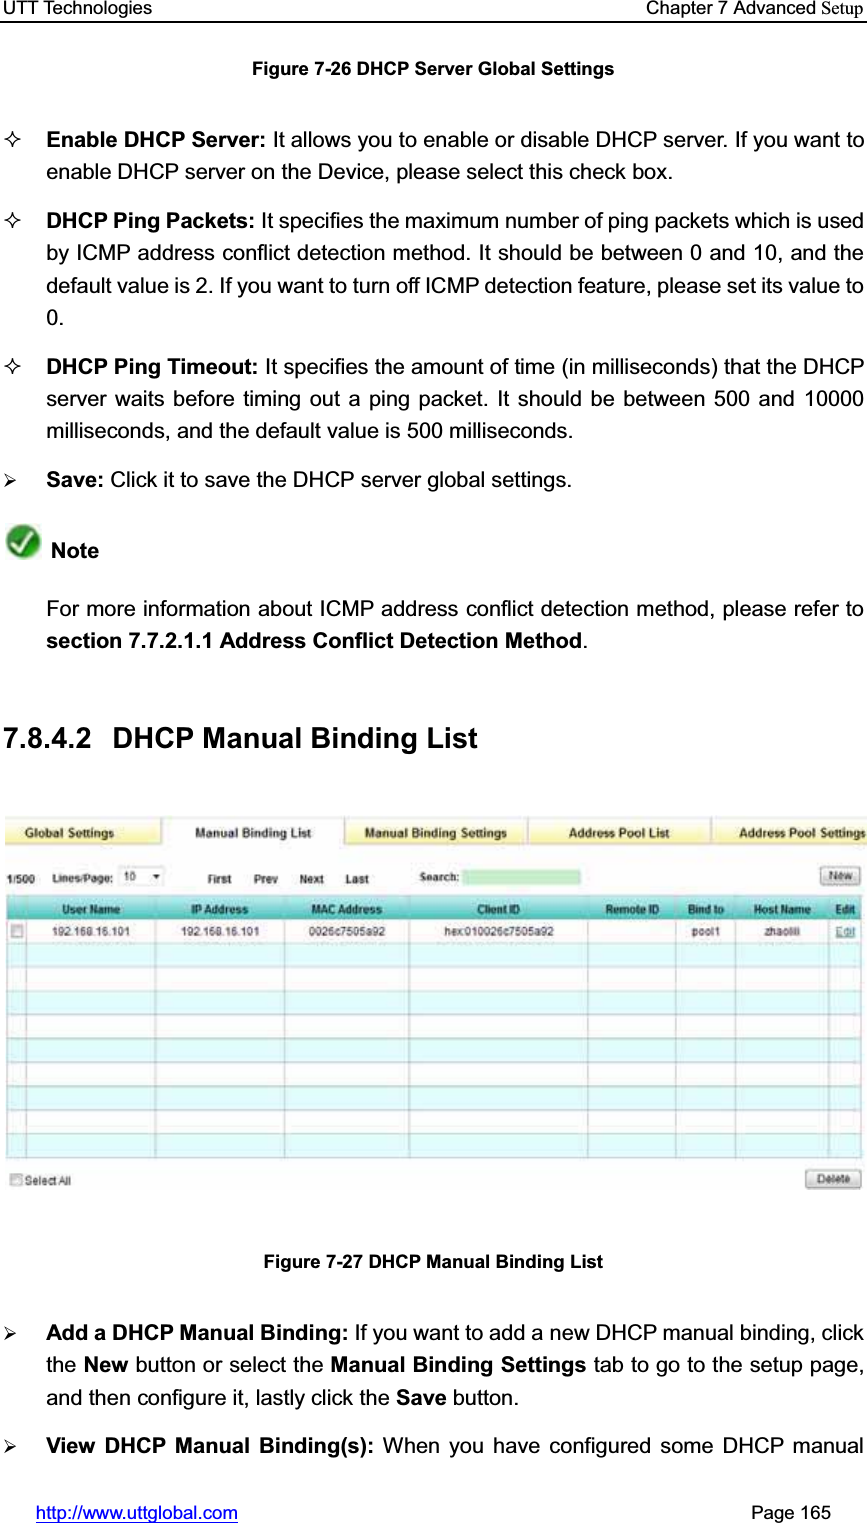 UTT Technologies    Chapter 7 Advanced Setuphttp://www.uttglobal.com                                                       Page 165 Figure 7-26 DHCP Server Global Settings Enable DHCP Server: It allows you to enable or disable DHCP server. If you want to enable DHCP server on the Device, please select this check box. DHCP Ping Packets: It specifies the maximum number of ping packets which is usedby ICMP address conflict detection method. It should be between 0 and 10, and the default value is 2. If you want to turn off ICMP detection feature, please set its value to 0.DHCP Ping Timeout: It specifies the amount of time (in milliseconds) that the DHCP server waits before timing out a ping packet. It should be between 500 and 10000 milliseconds, and the default value is 500 milliseconds.¾Save: Click it to save the DHCP server global settings.NoteFor more information about ICMP address conflict detection method, please refer to section 7.7.2.1.1 Address Conflict Detection Method.7.8.4.2  DHCP Manual Binding List Figure 7-27 DHCP Manual Binding List ¾Add a DHCP Manual Binding: If you want to add a new DHCP manual binding, clickthe New button or select the Manual Binding Settings tab to go to the setup page, and then configure it, lastly click the Save button. ¾View DHCP Manual Binding(s): When you have configured some DHCP manual 